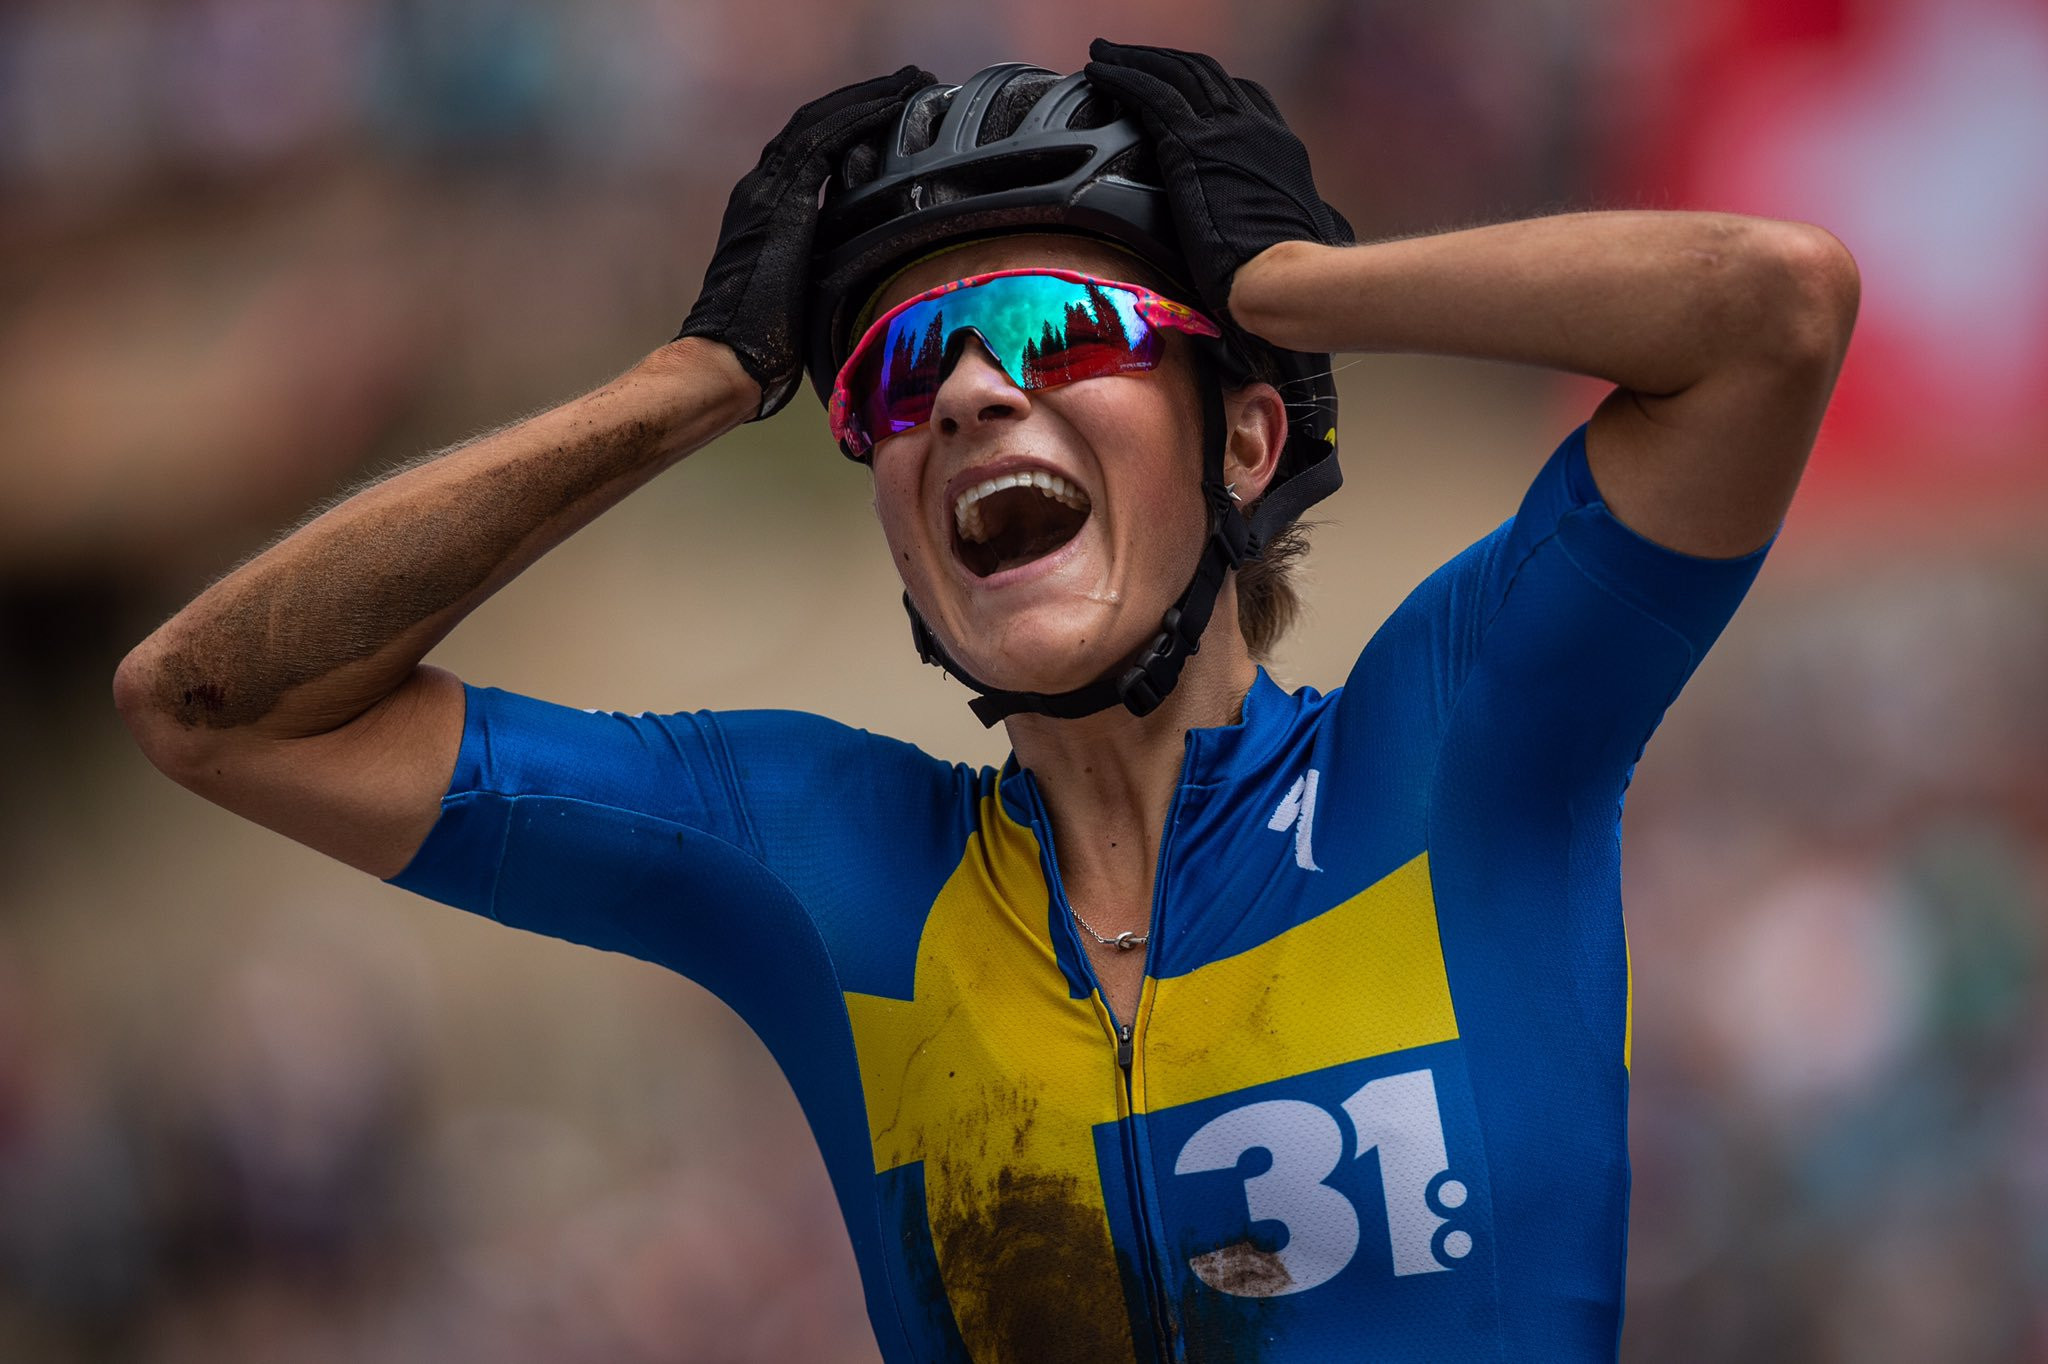 Rissveds breaks clear to win cross-country title at UCI Mountain Bike World Cup